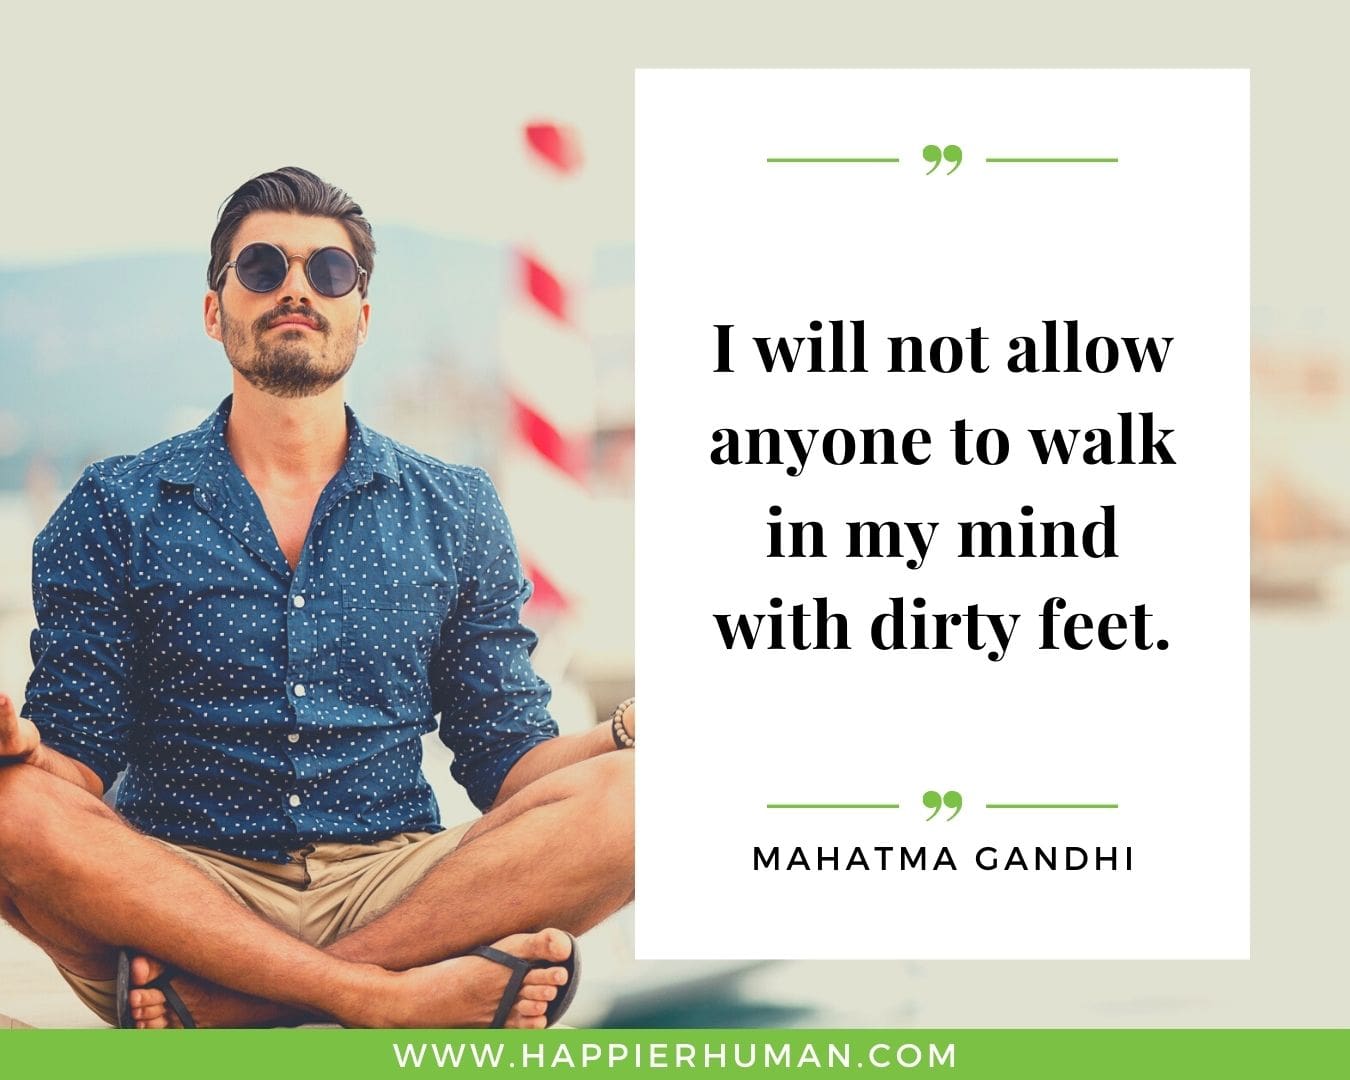 Toxic People Quotes - “I will not allow anyone to walk in my mind with dirty feet.” – Mahatma Gandhi